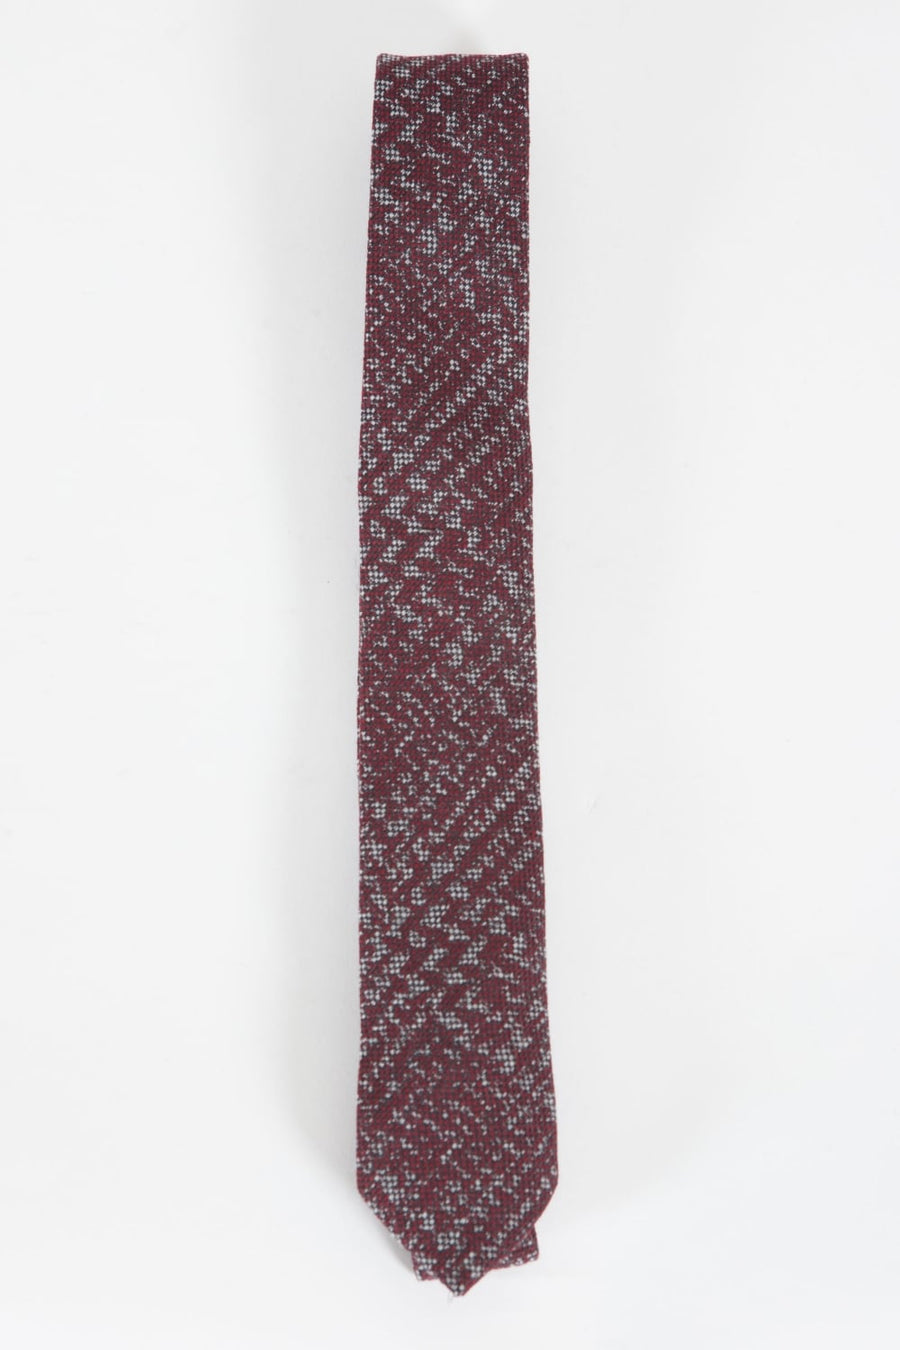 Buy the Remus Uomo Narrow Checked Tie Burgundy at Intro. Spend £50 for free UK delivery. Official stockists. We ship worldwide.